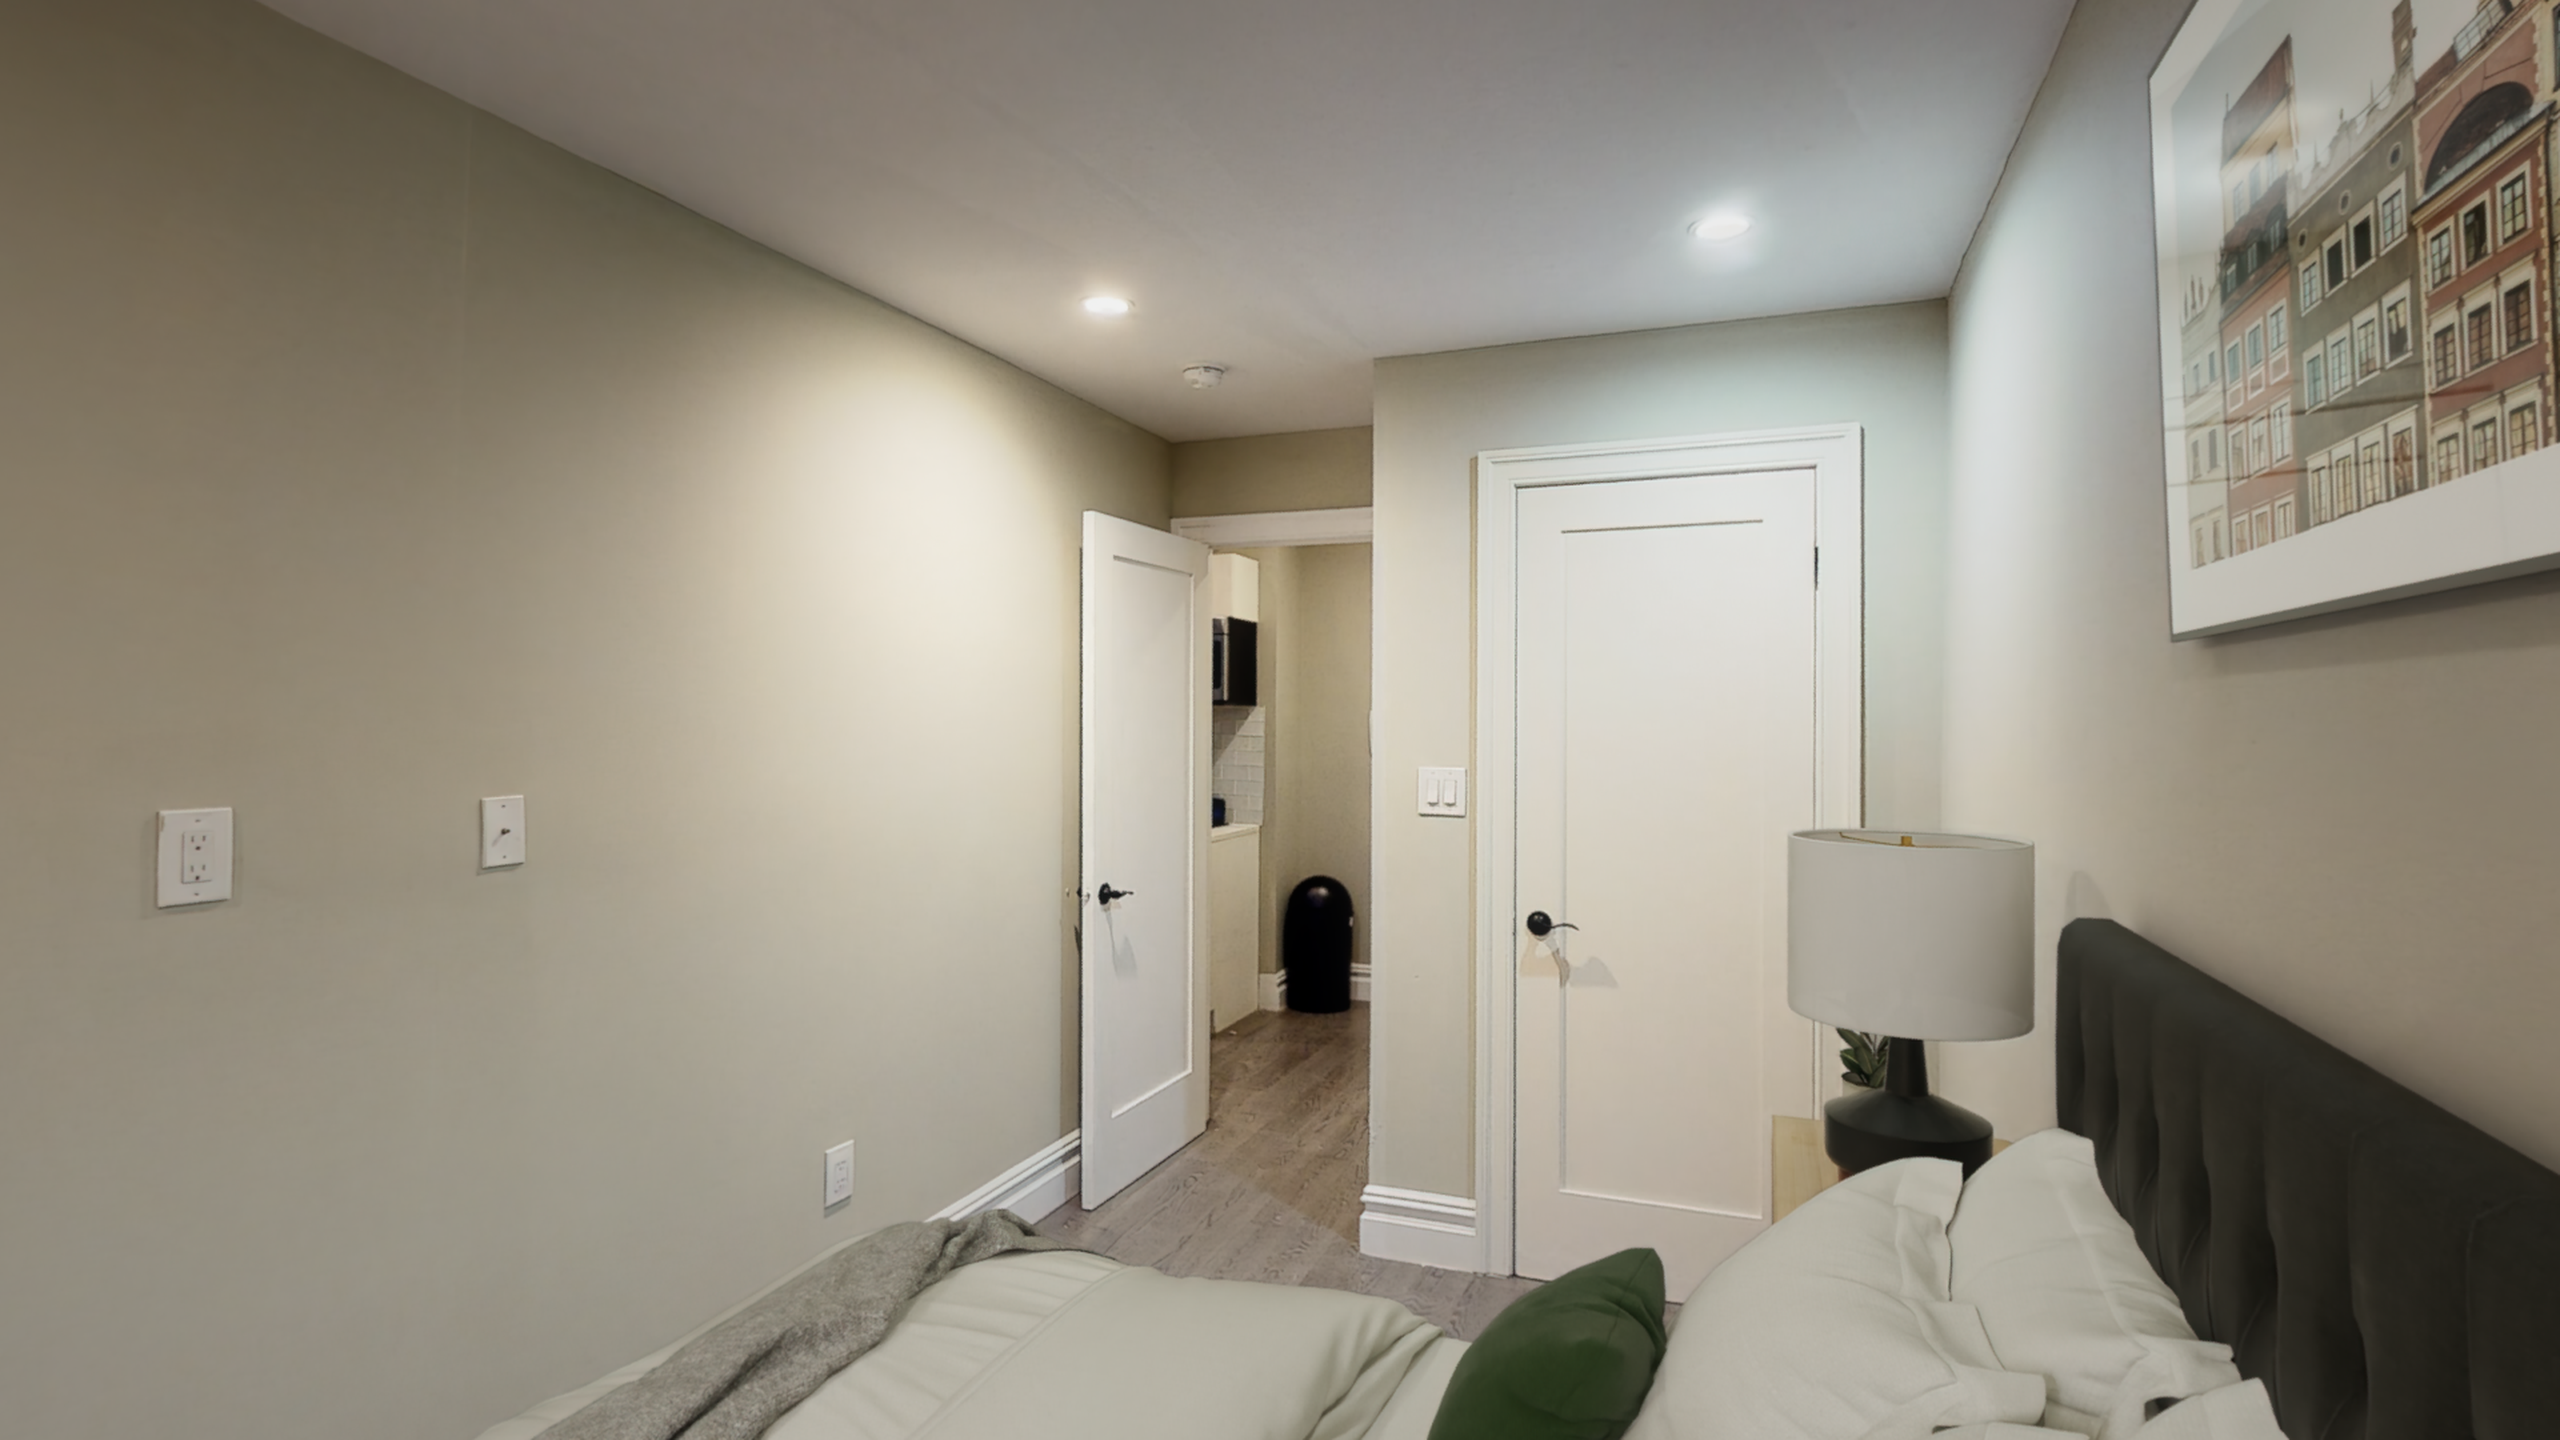 Photo 18 of #1530: Queen Bedroom A at June Homes